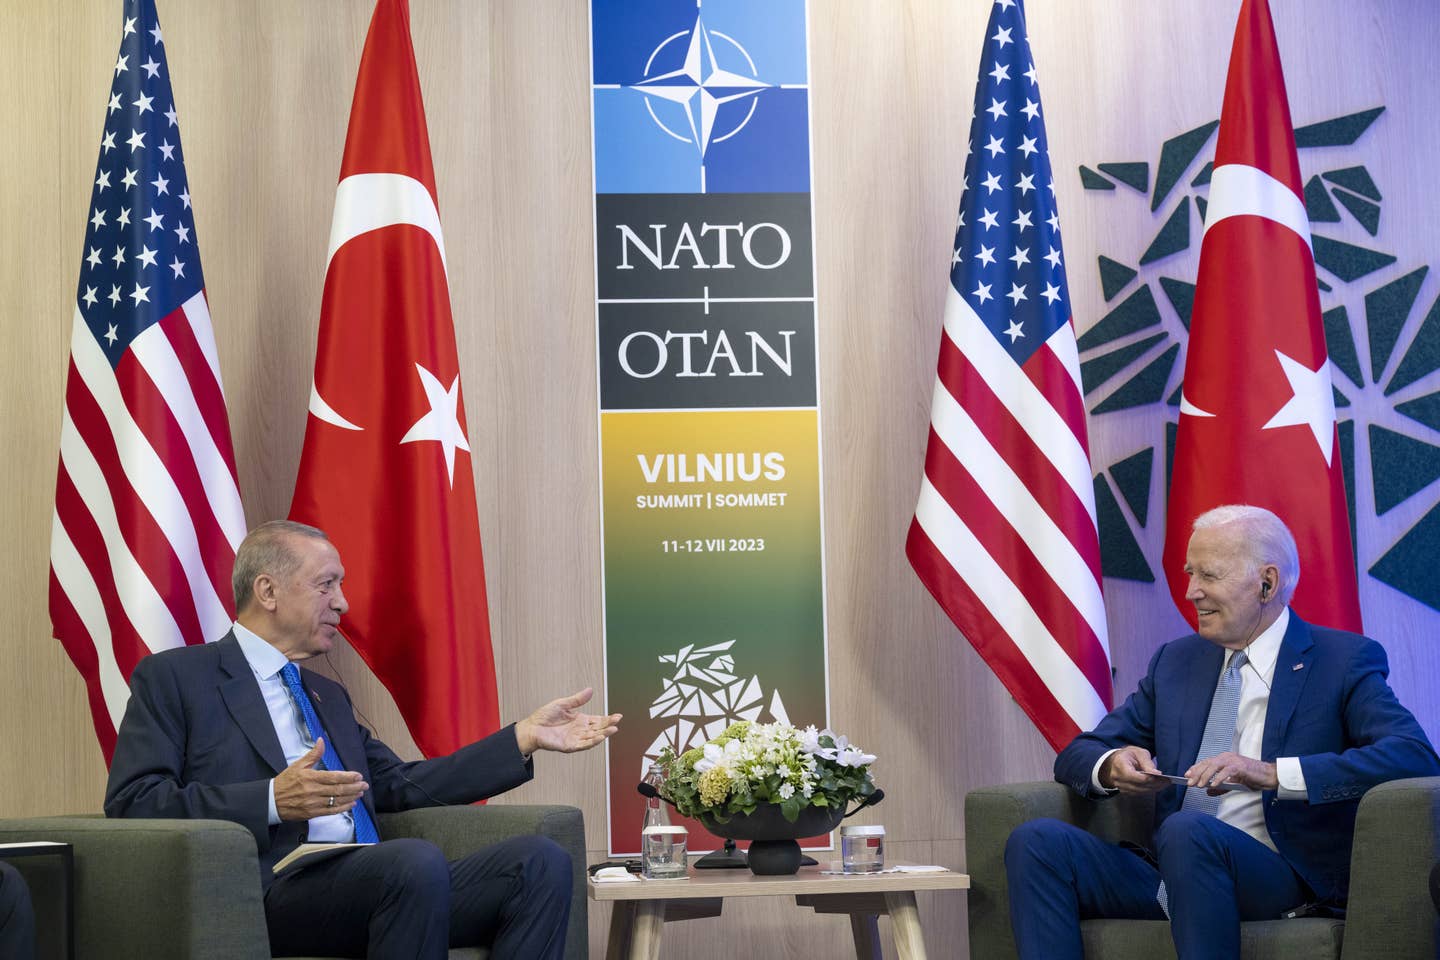 Turkish President Recep Tayyip Erdogan (left) meets U.S. President Joe Biden within the NATO Heads of State and Government Summit in Vilnius, Lithuania, on July 11, 2023. <em>Photo by Aytac Unal/Anadolu Agency via Getty Images</em>